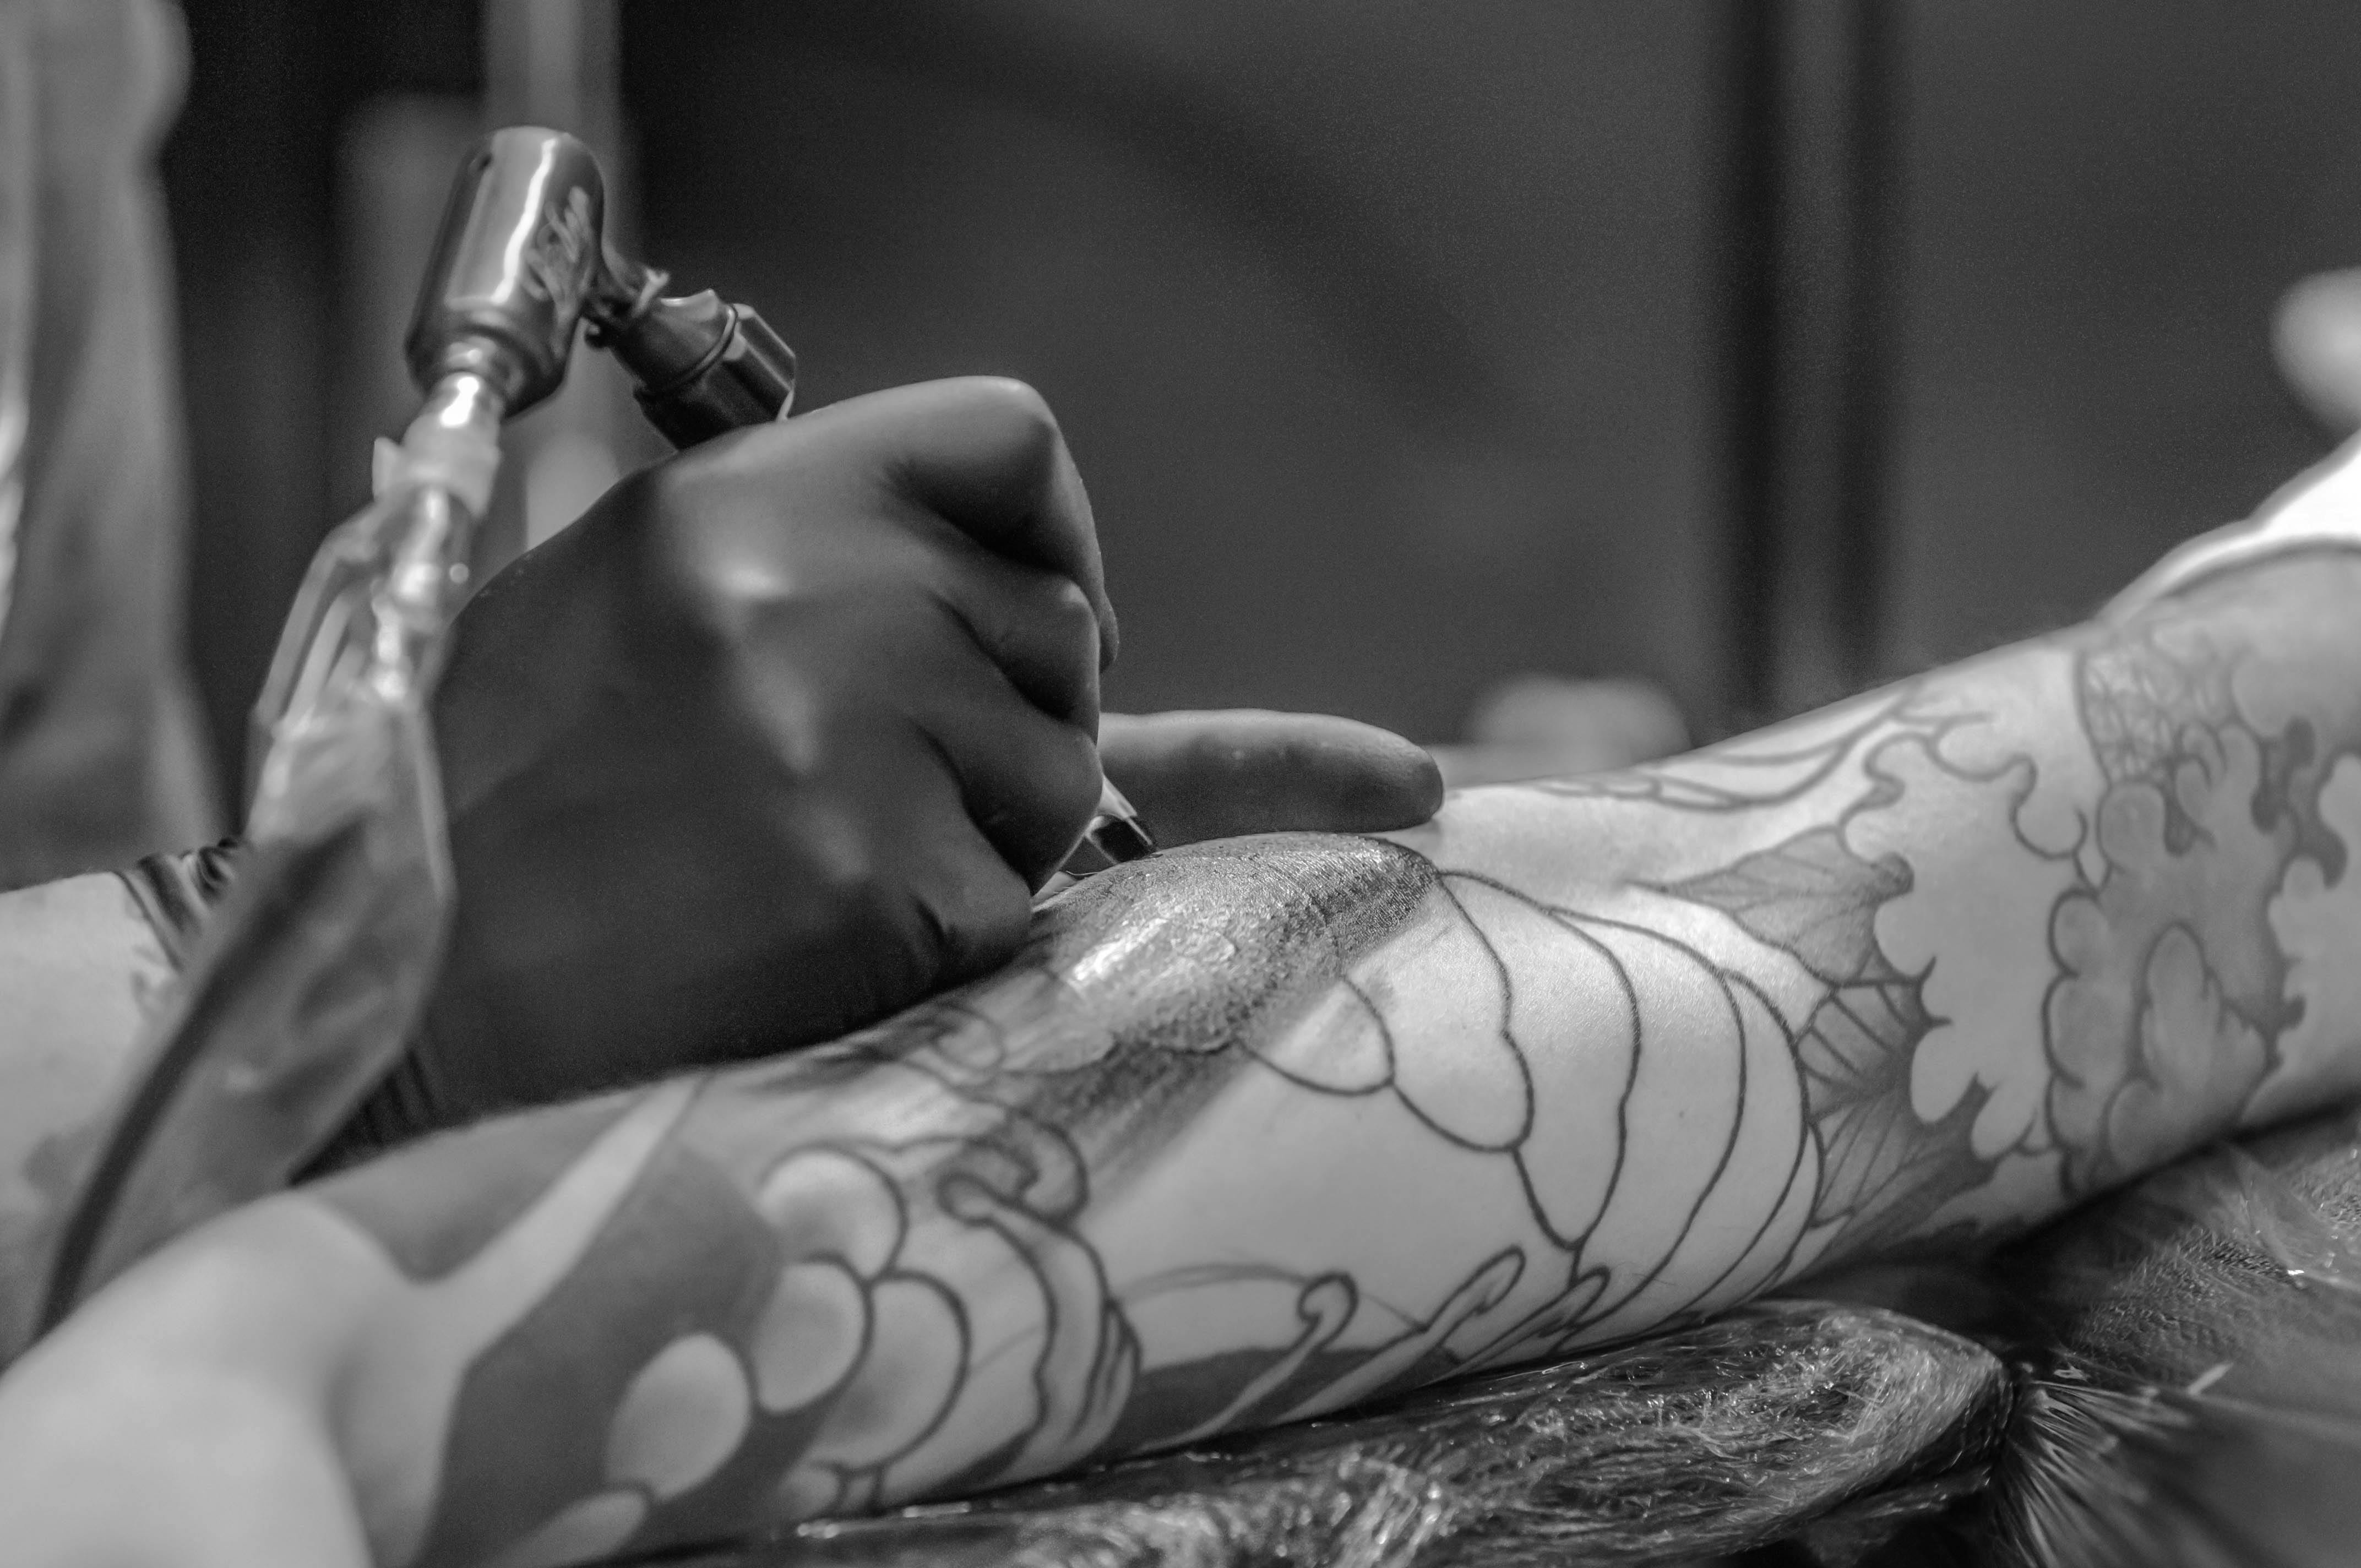 Top 5 Reasons Why Tattoo Artists Wear Black Nitrile Gloves